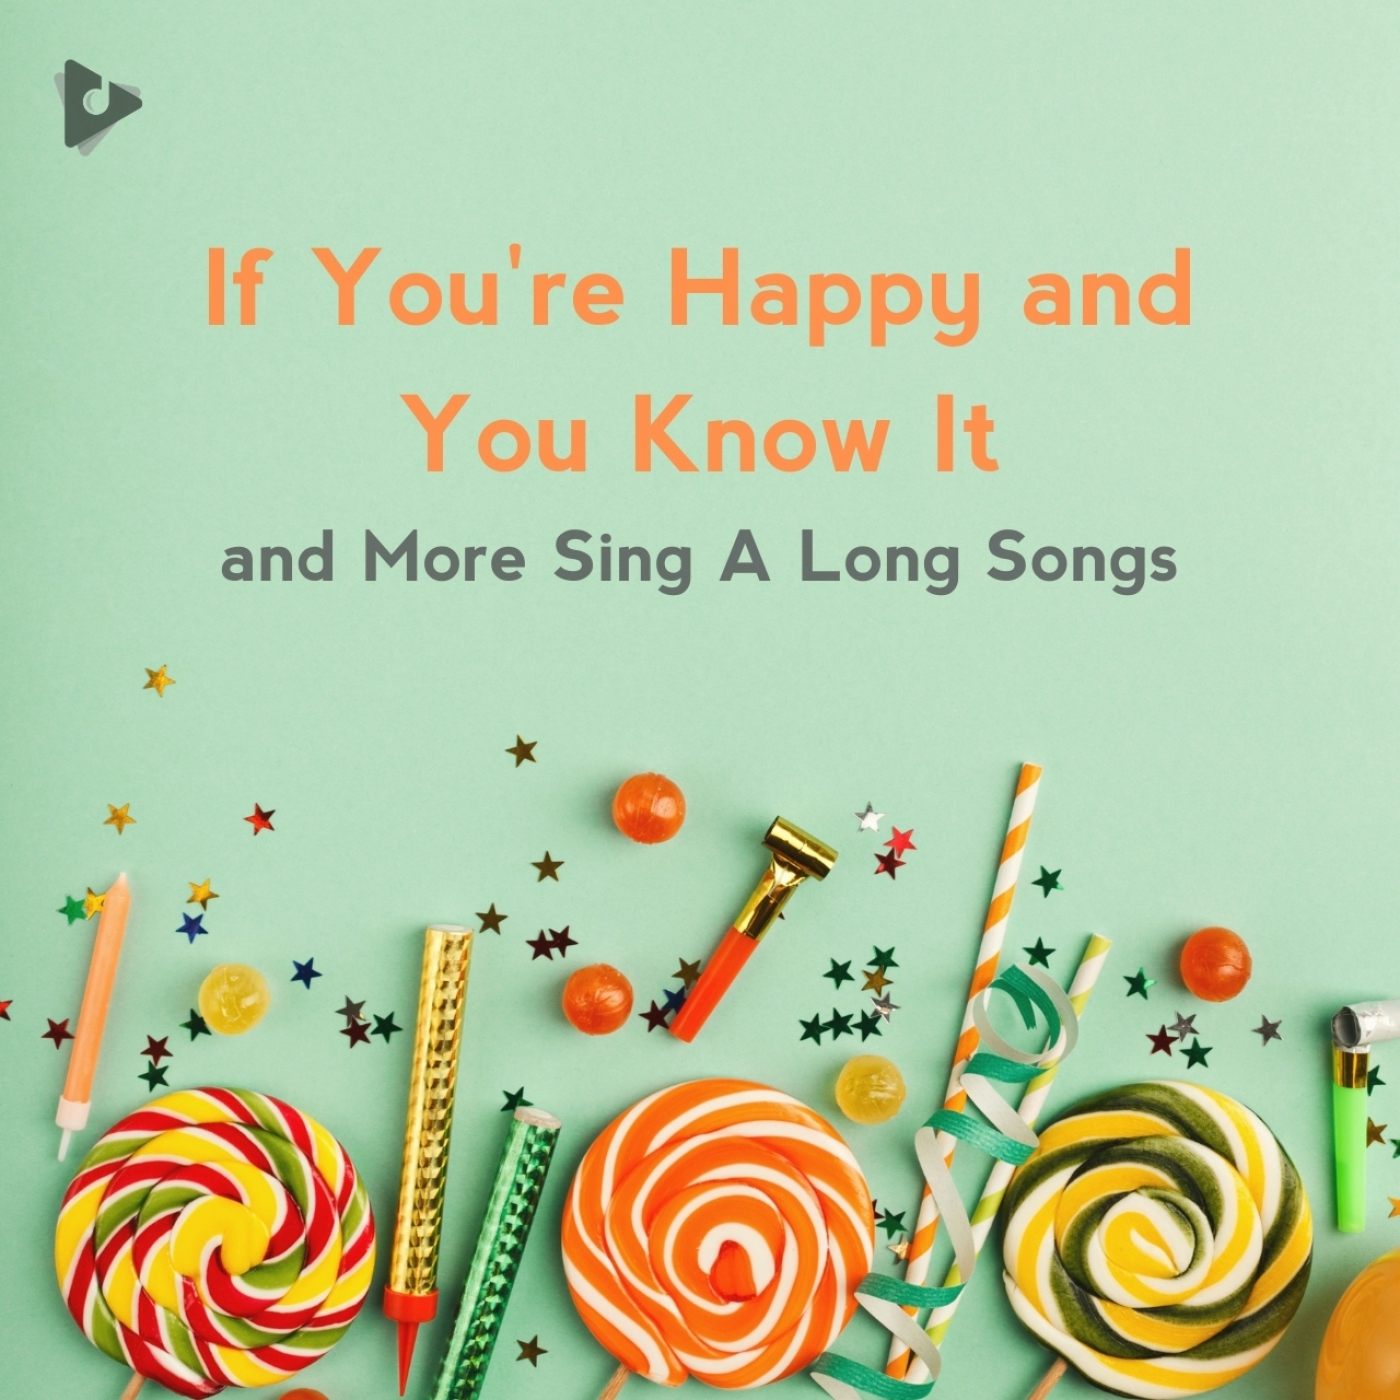 If You're Happy and You Know It and More Sing A Long Songs